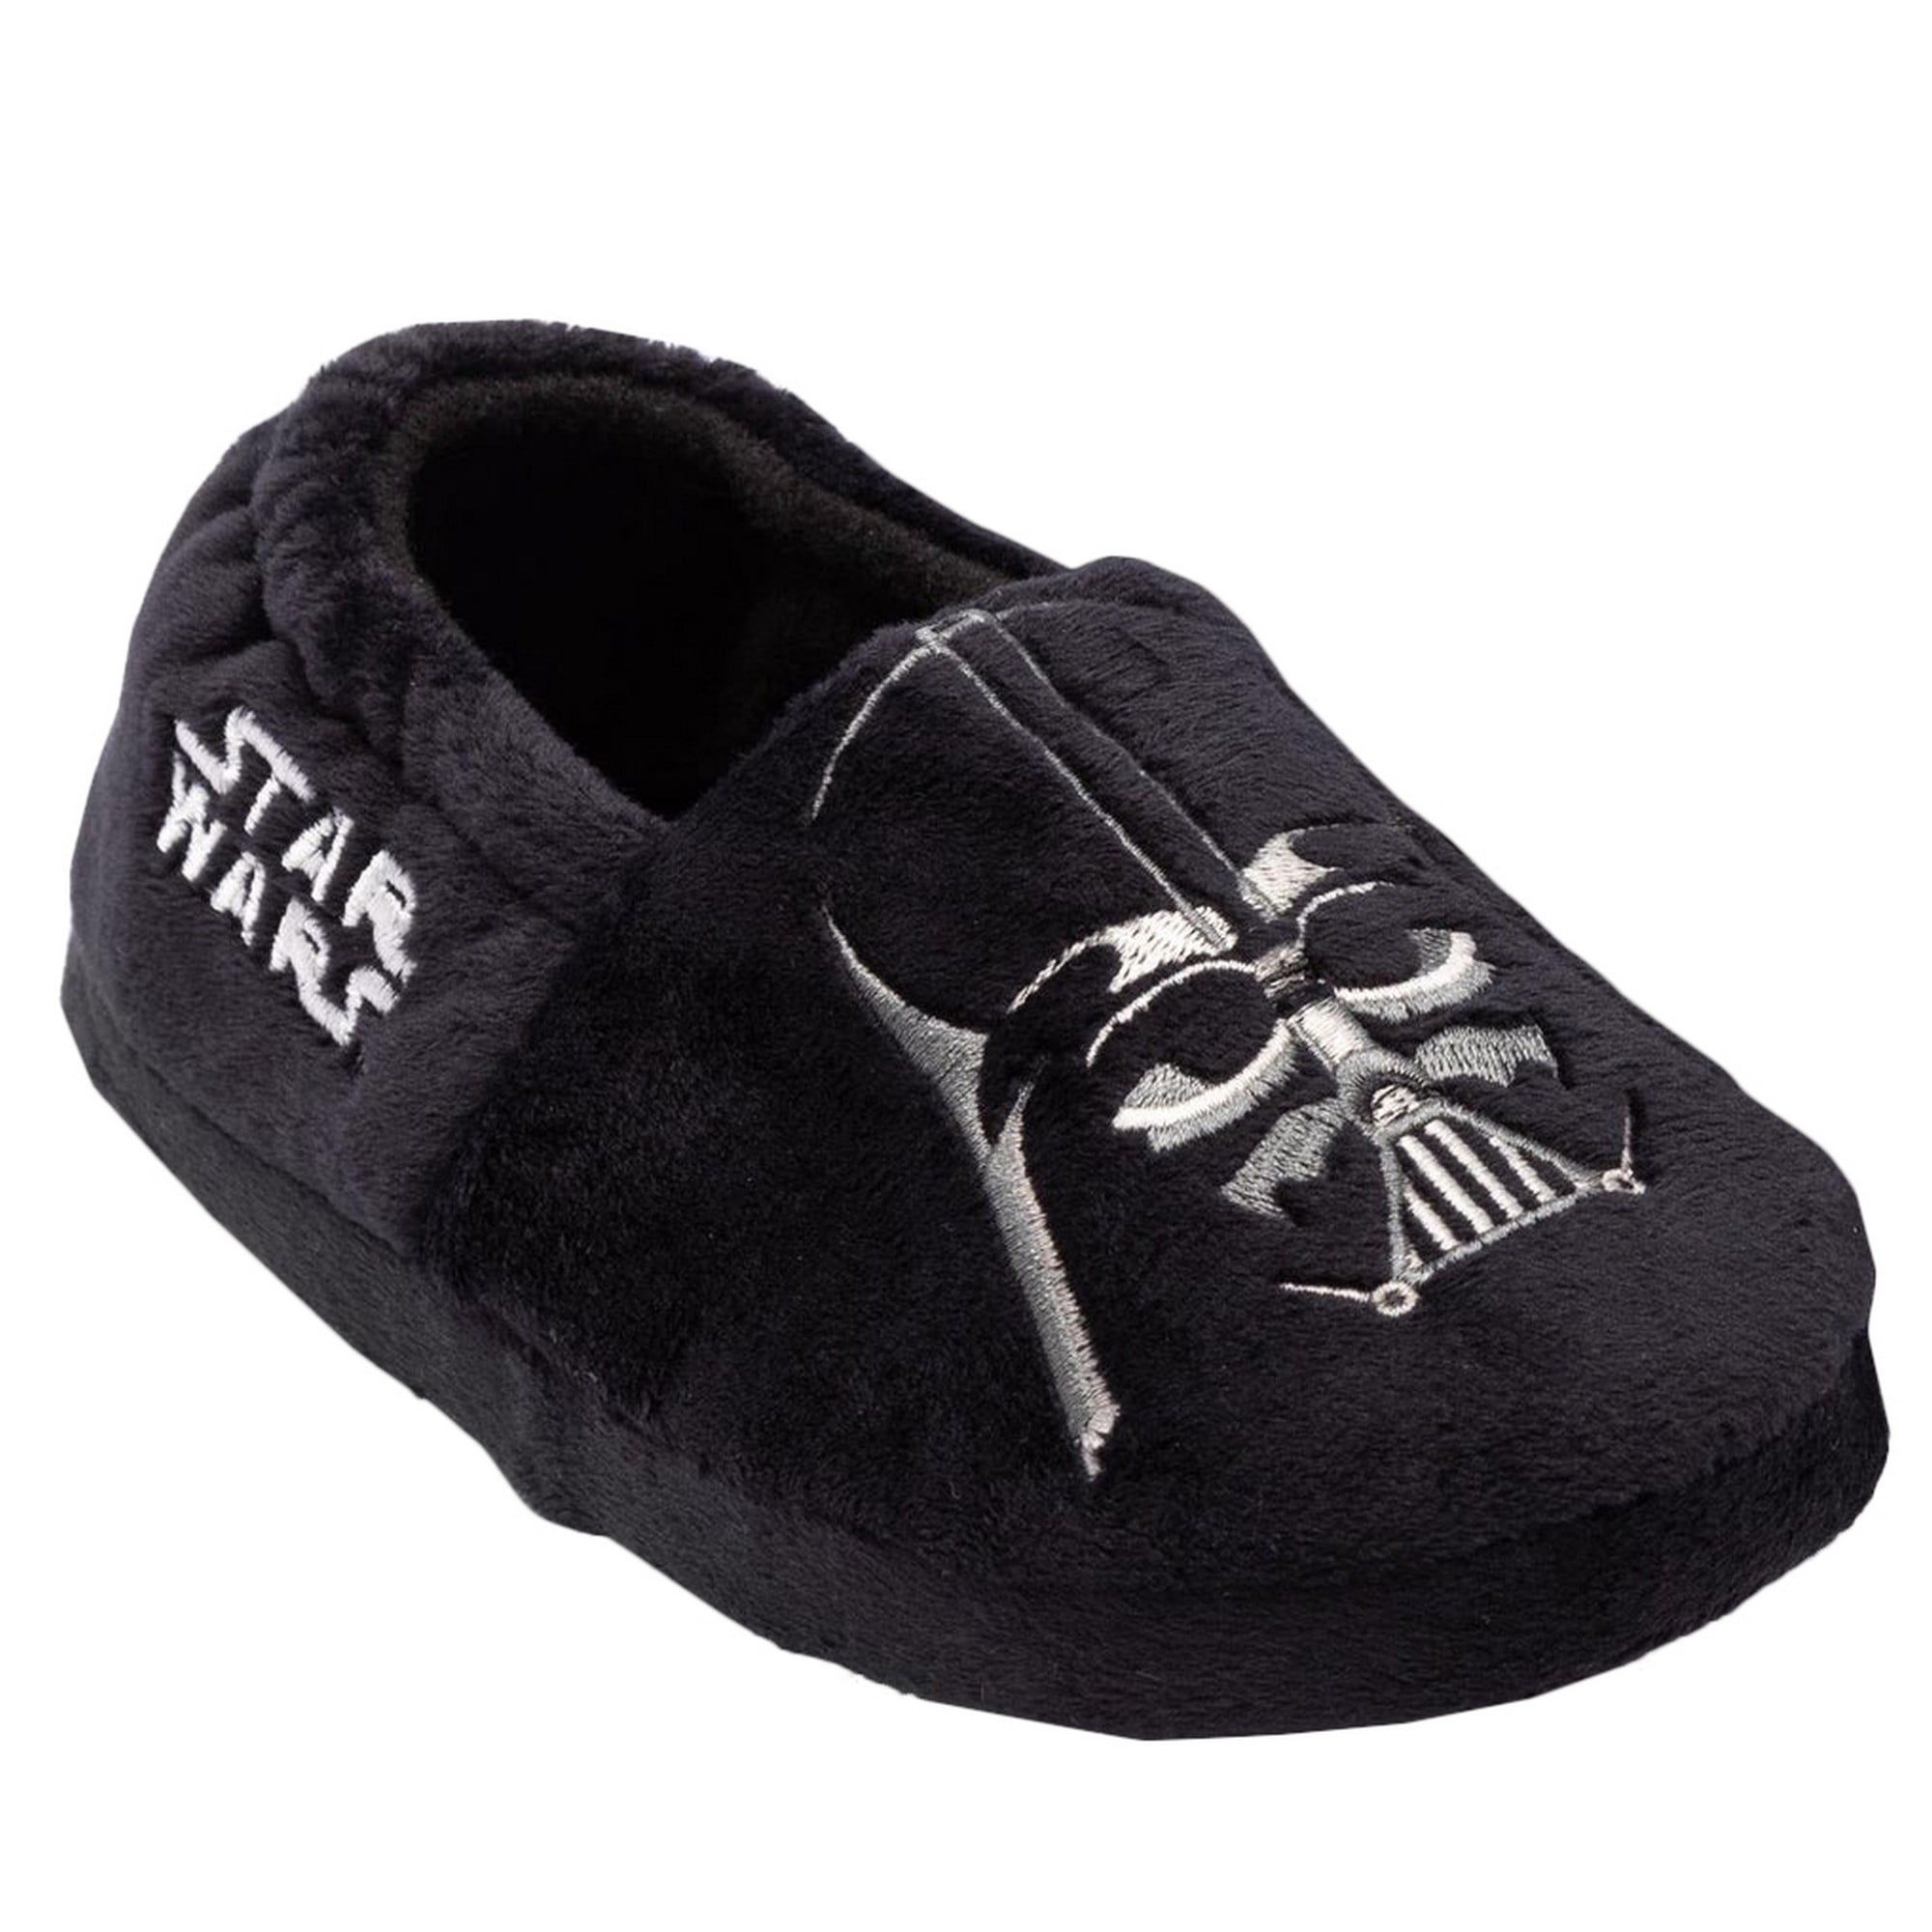 Disney Star Wars Boys Slippers in Black and White 